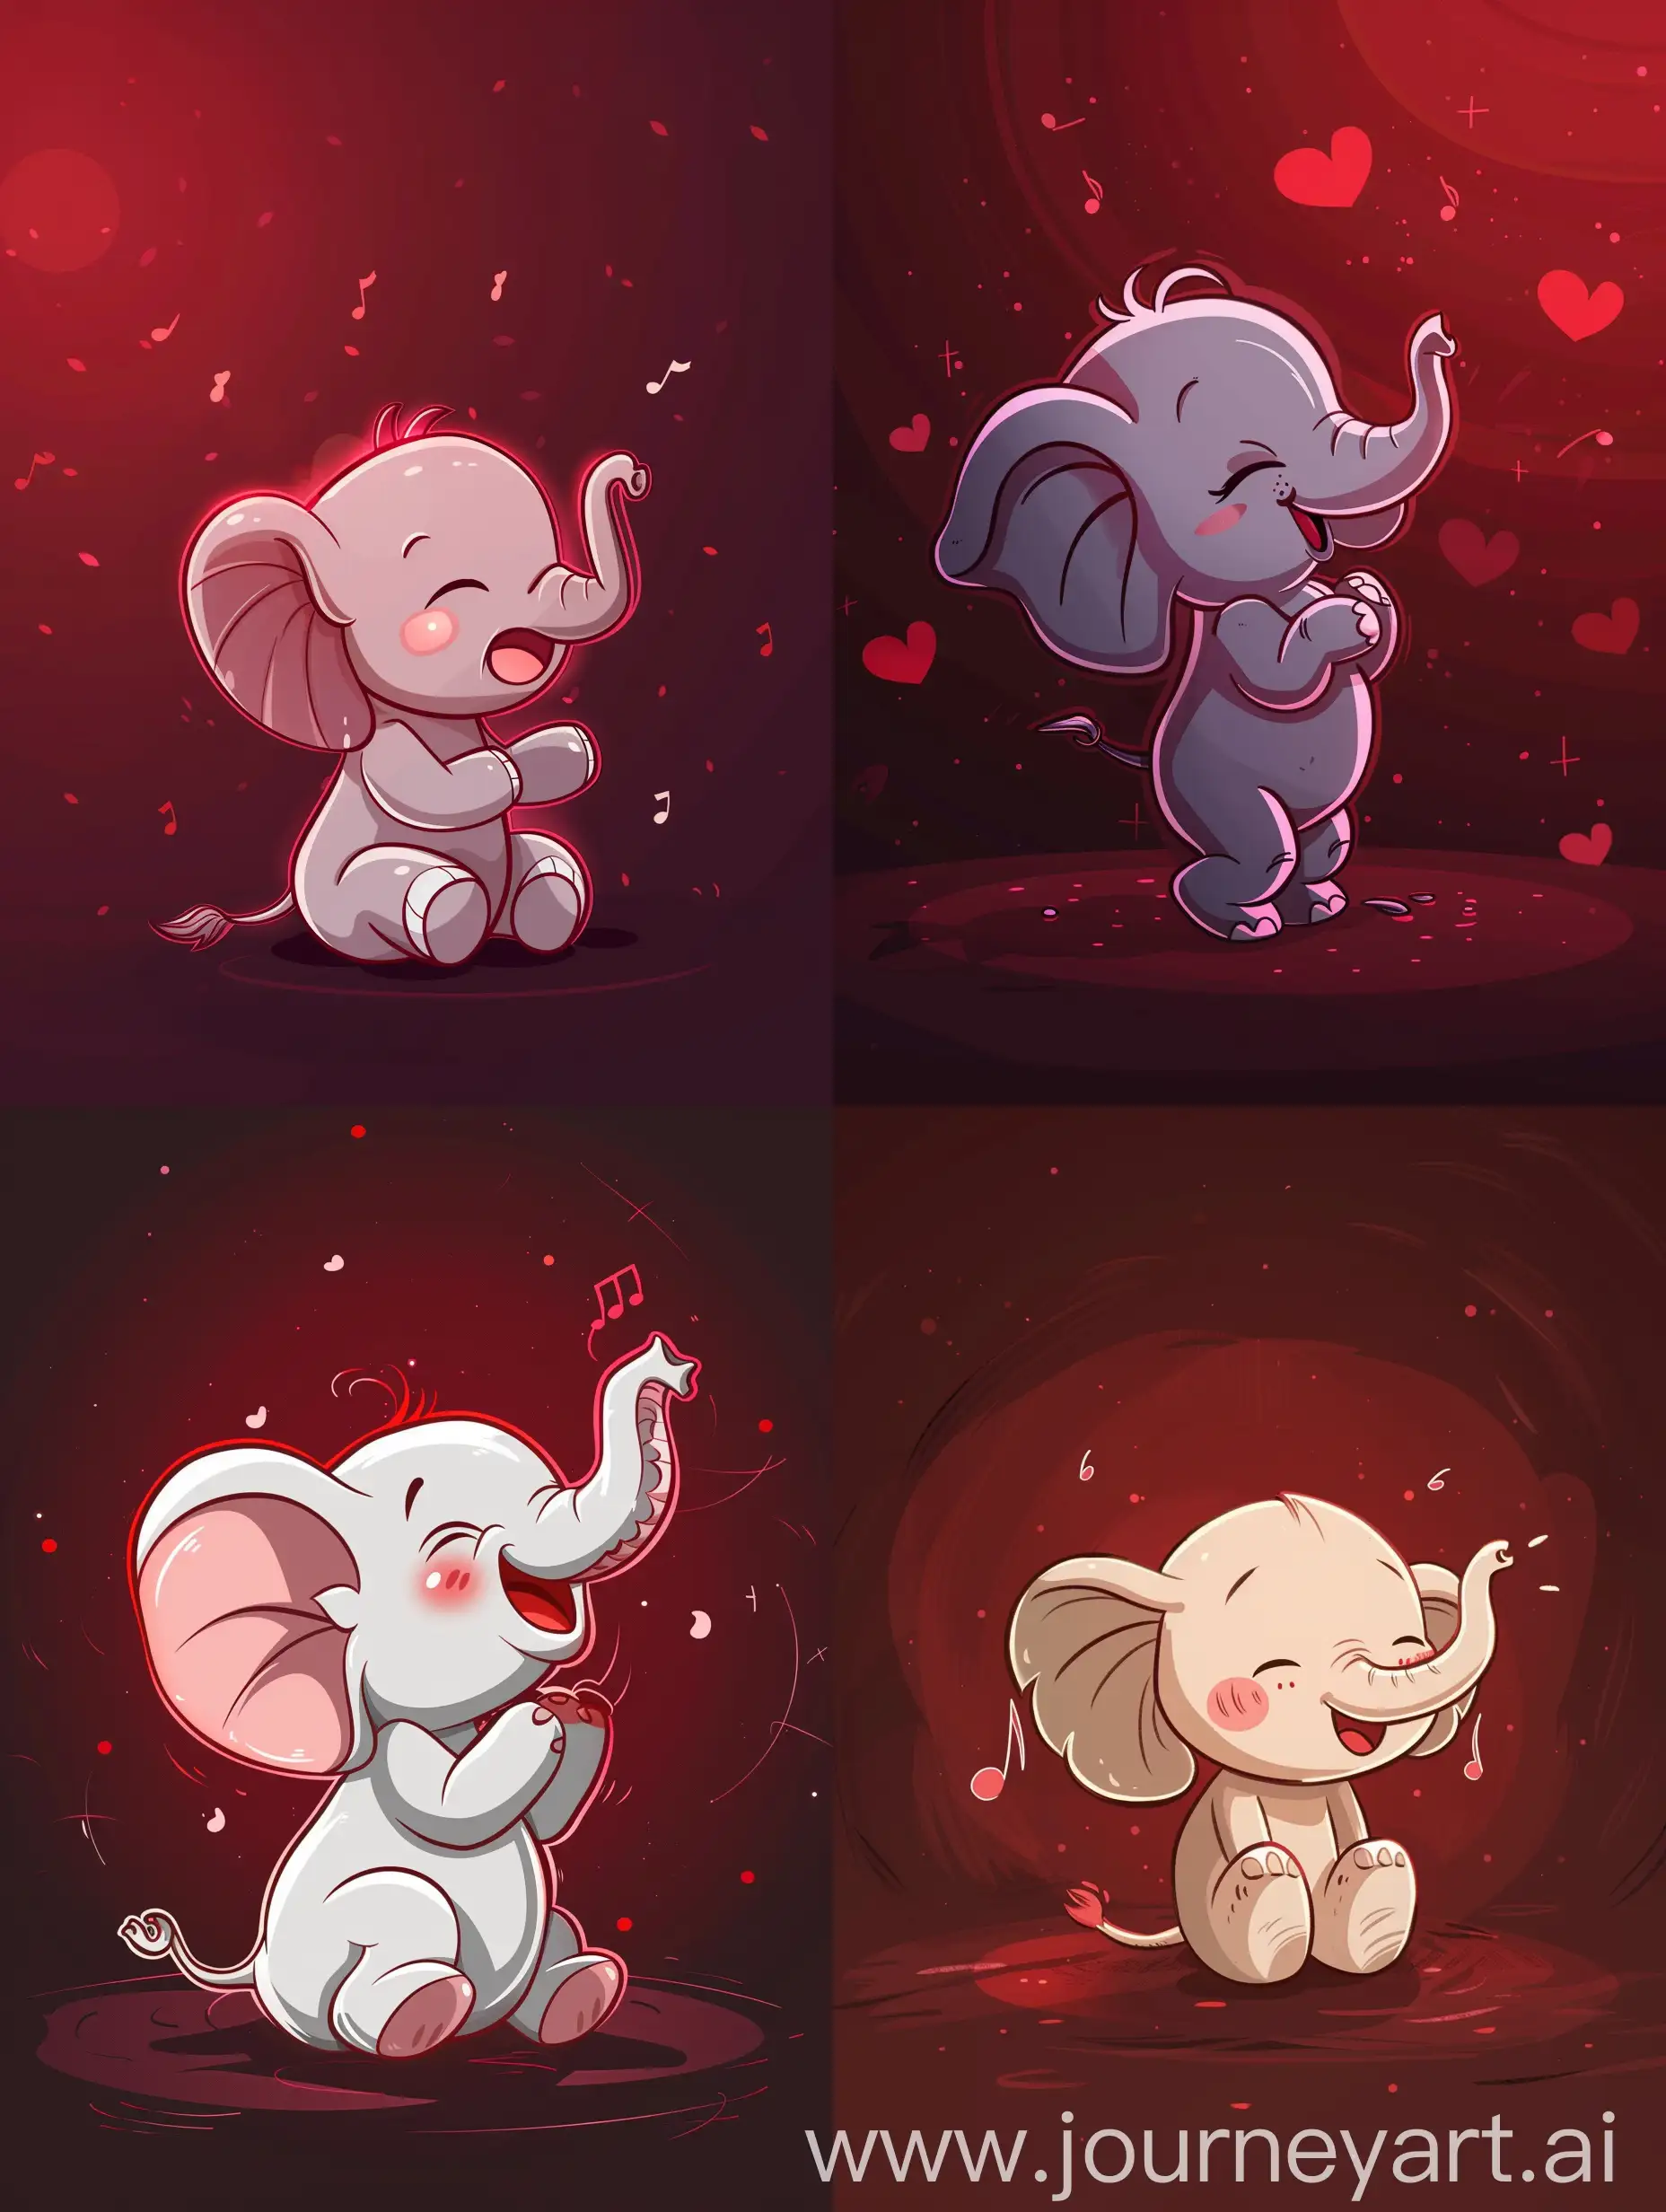 Chibi-Cute-Elephant-Singing-in-Thin-Line-Style-with-Solid-Dark-Red-Background